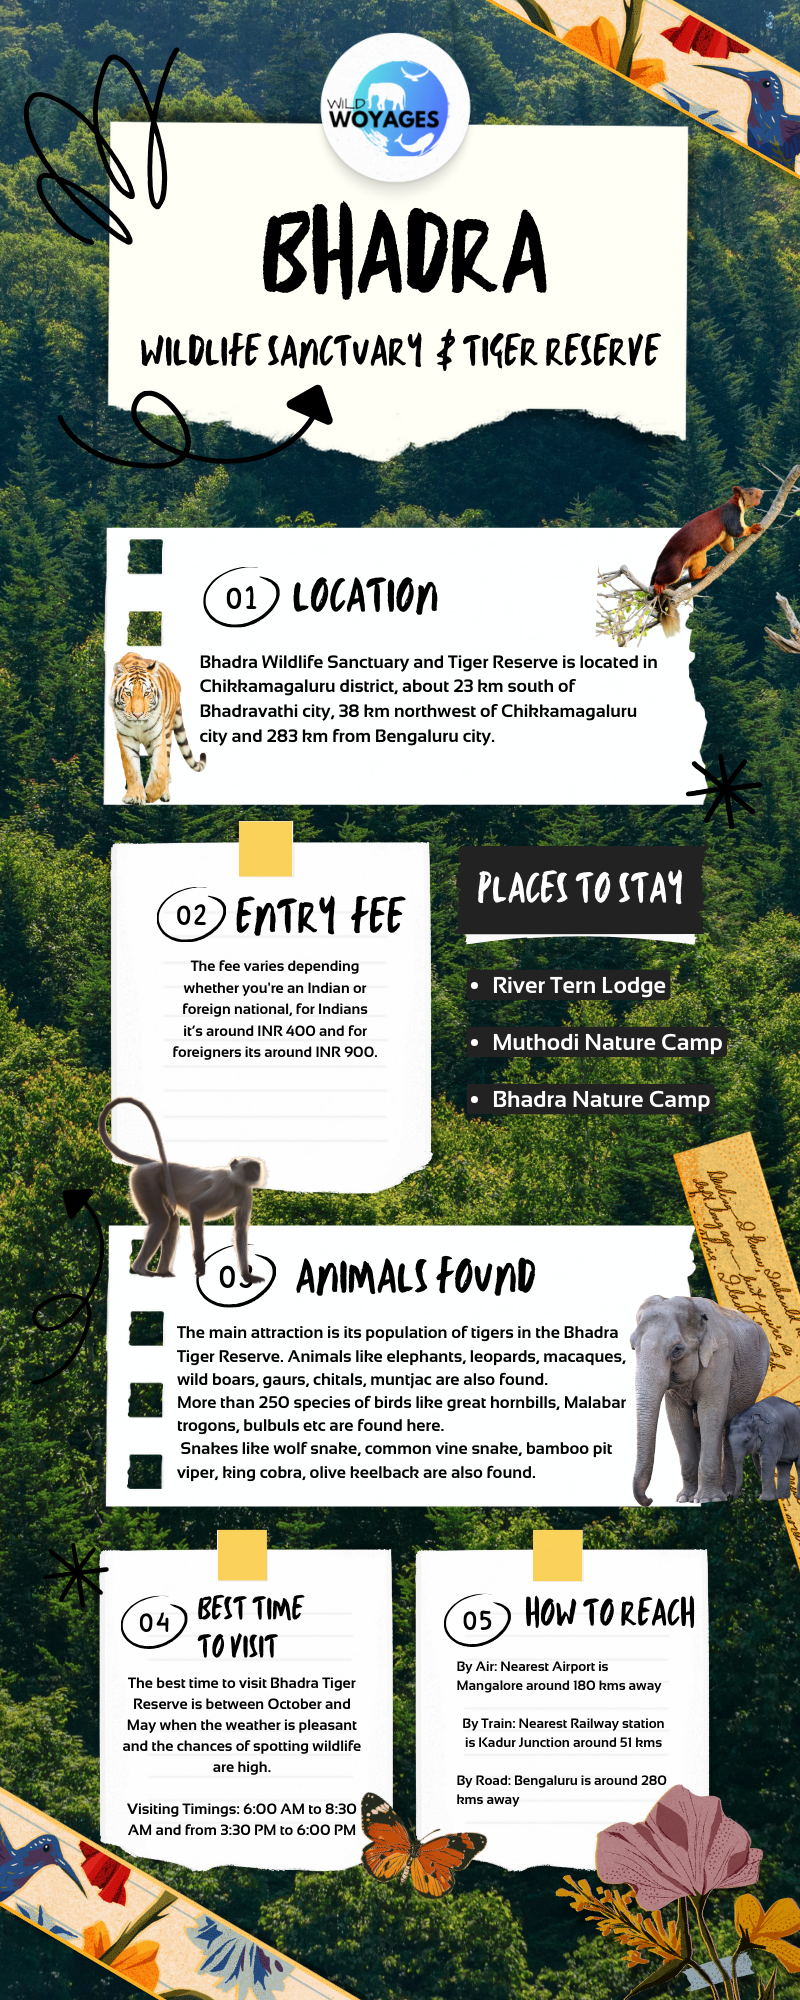 Bhadra Wildlife Sanctuary and Tiger Reserve Quick Guide - Infographic